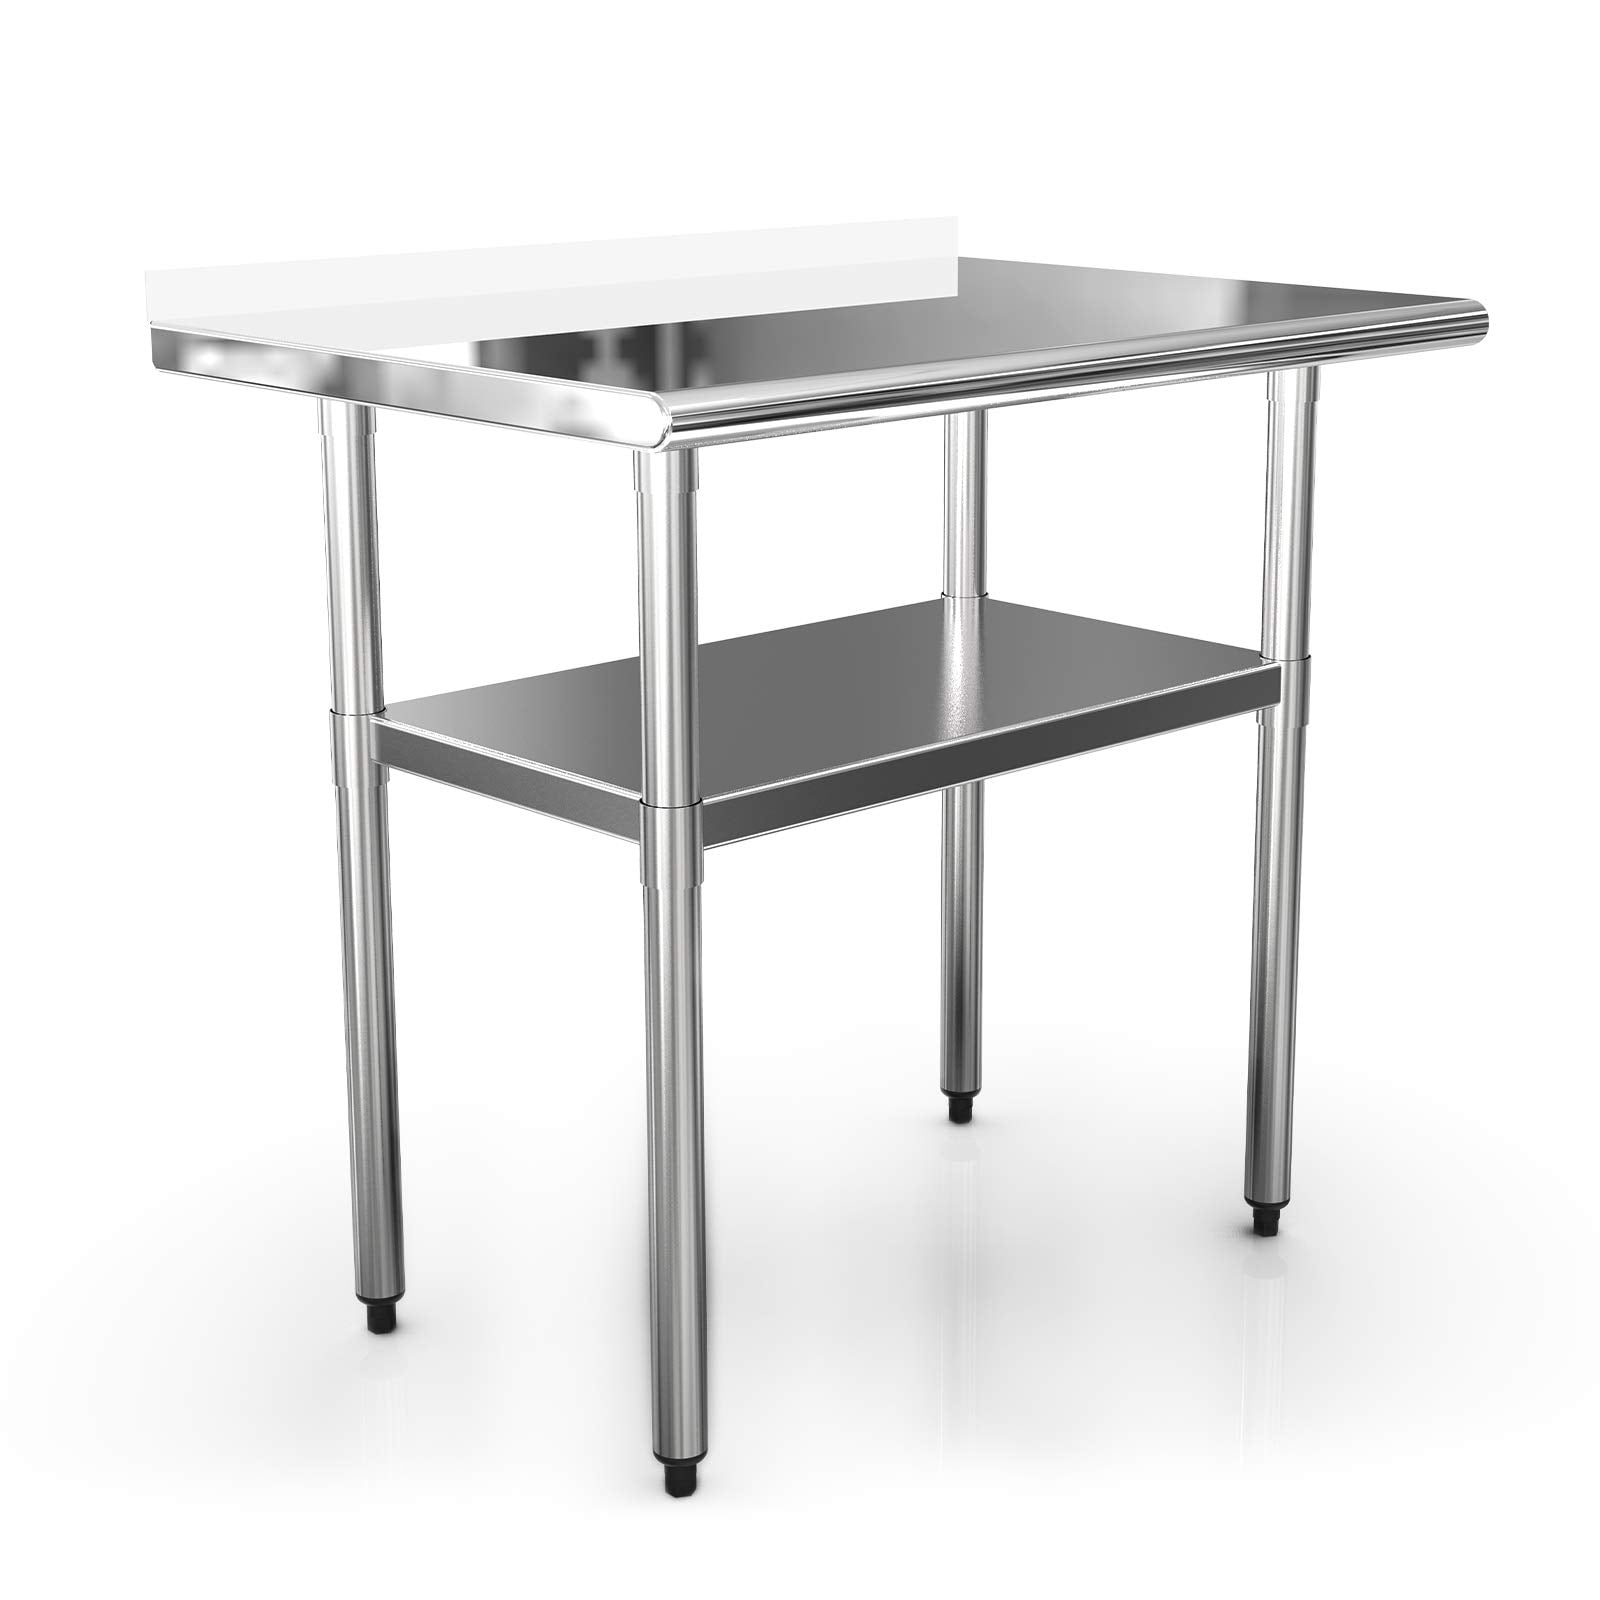 Stainless Steel Table Commercial Prep Table 36x24 Inches Kitchen ...